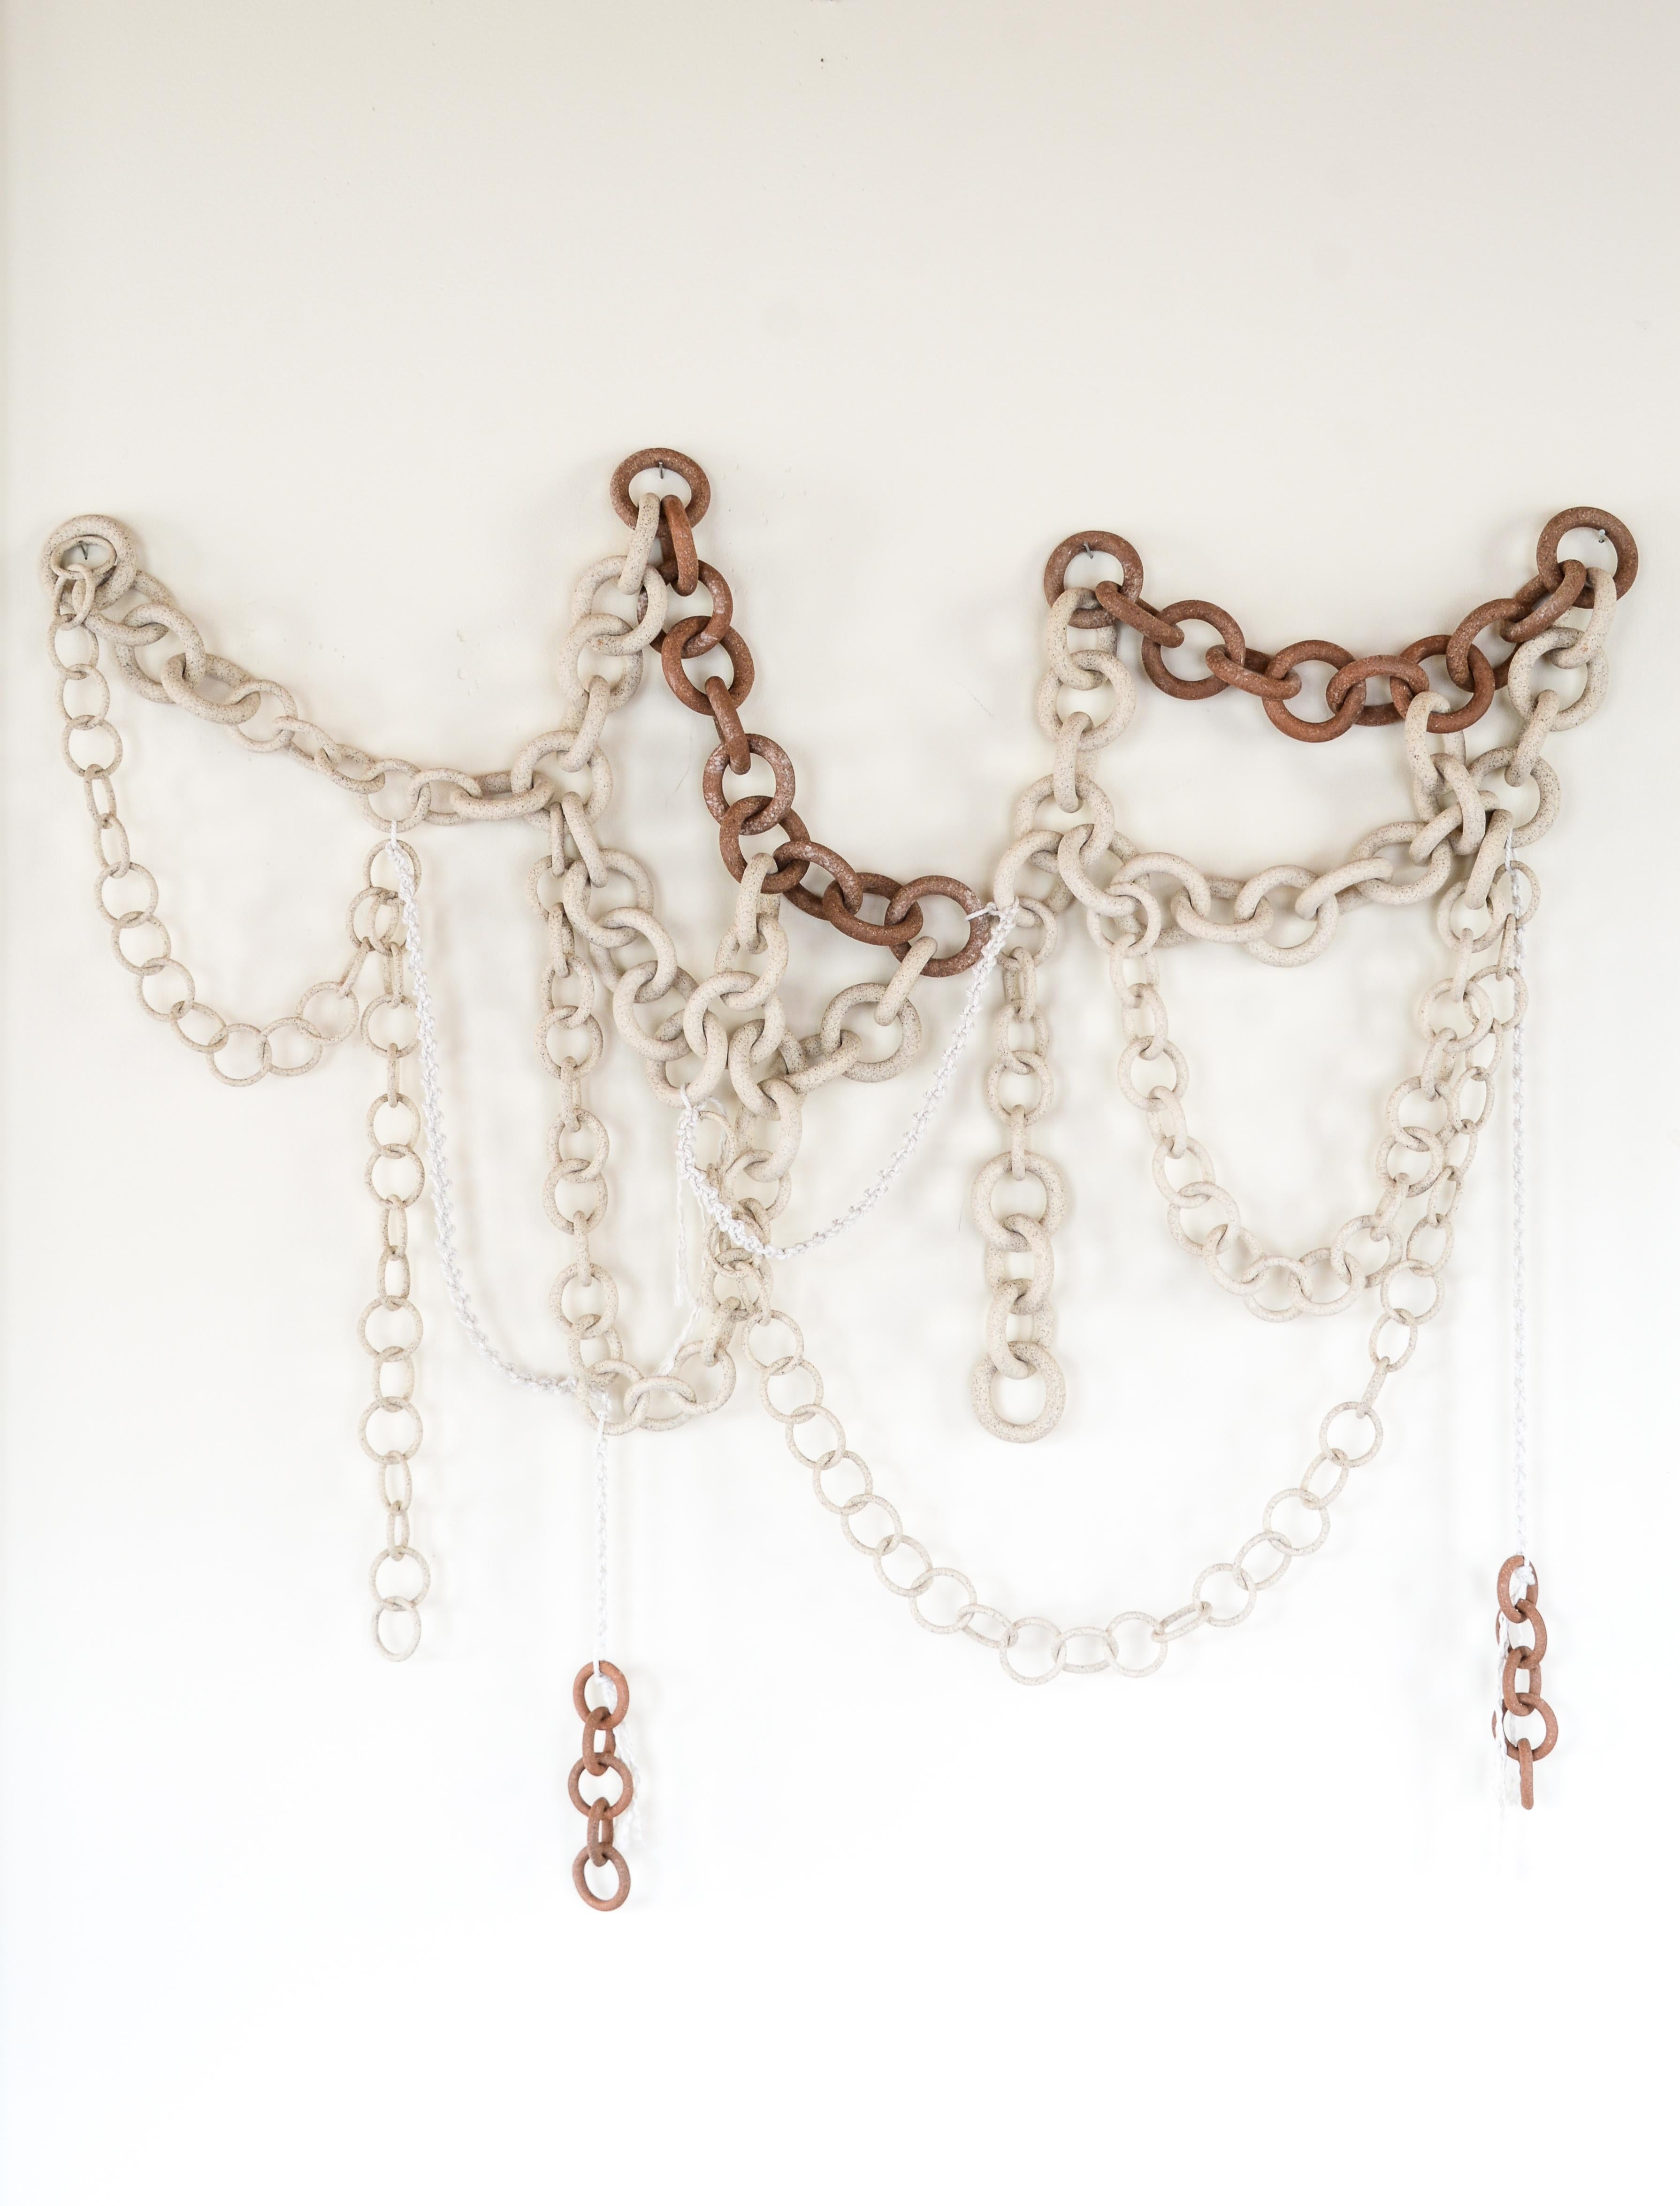 Contemporary Ceramic Link Chain Wall Sculpture For Sale